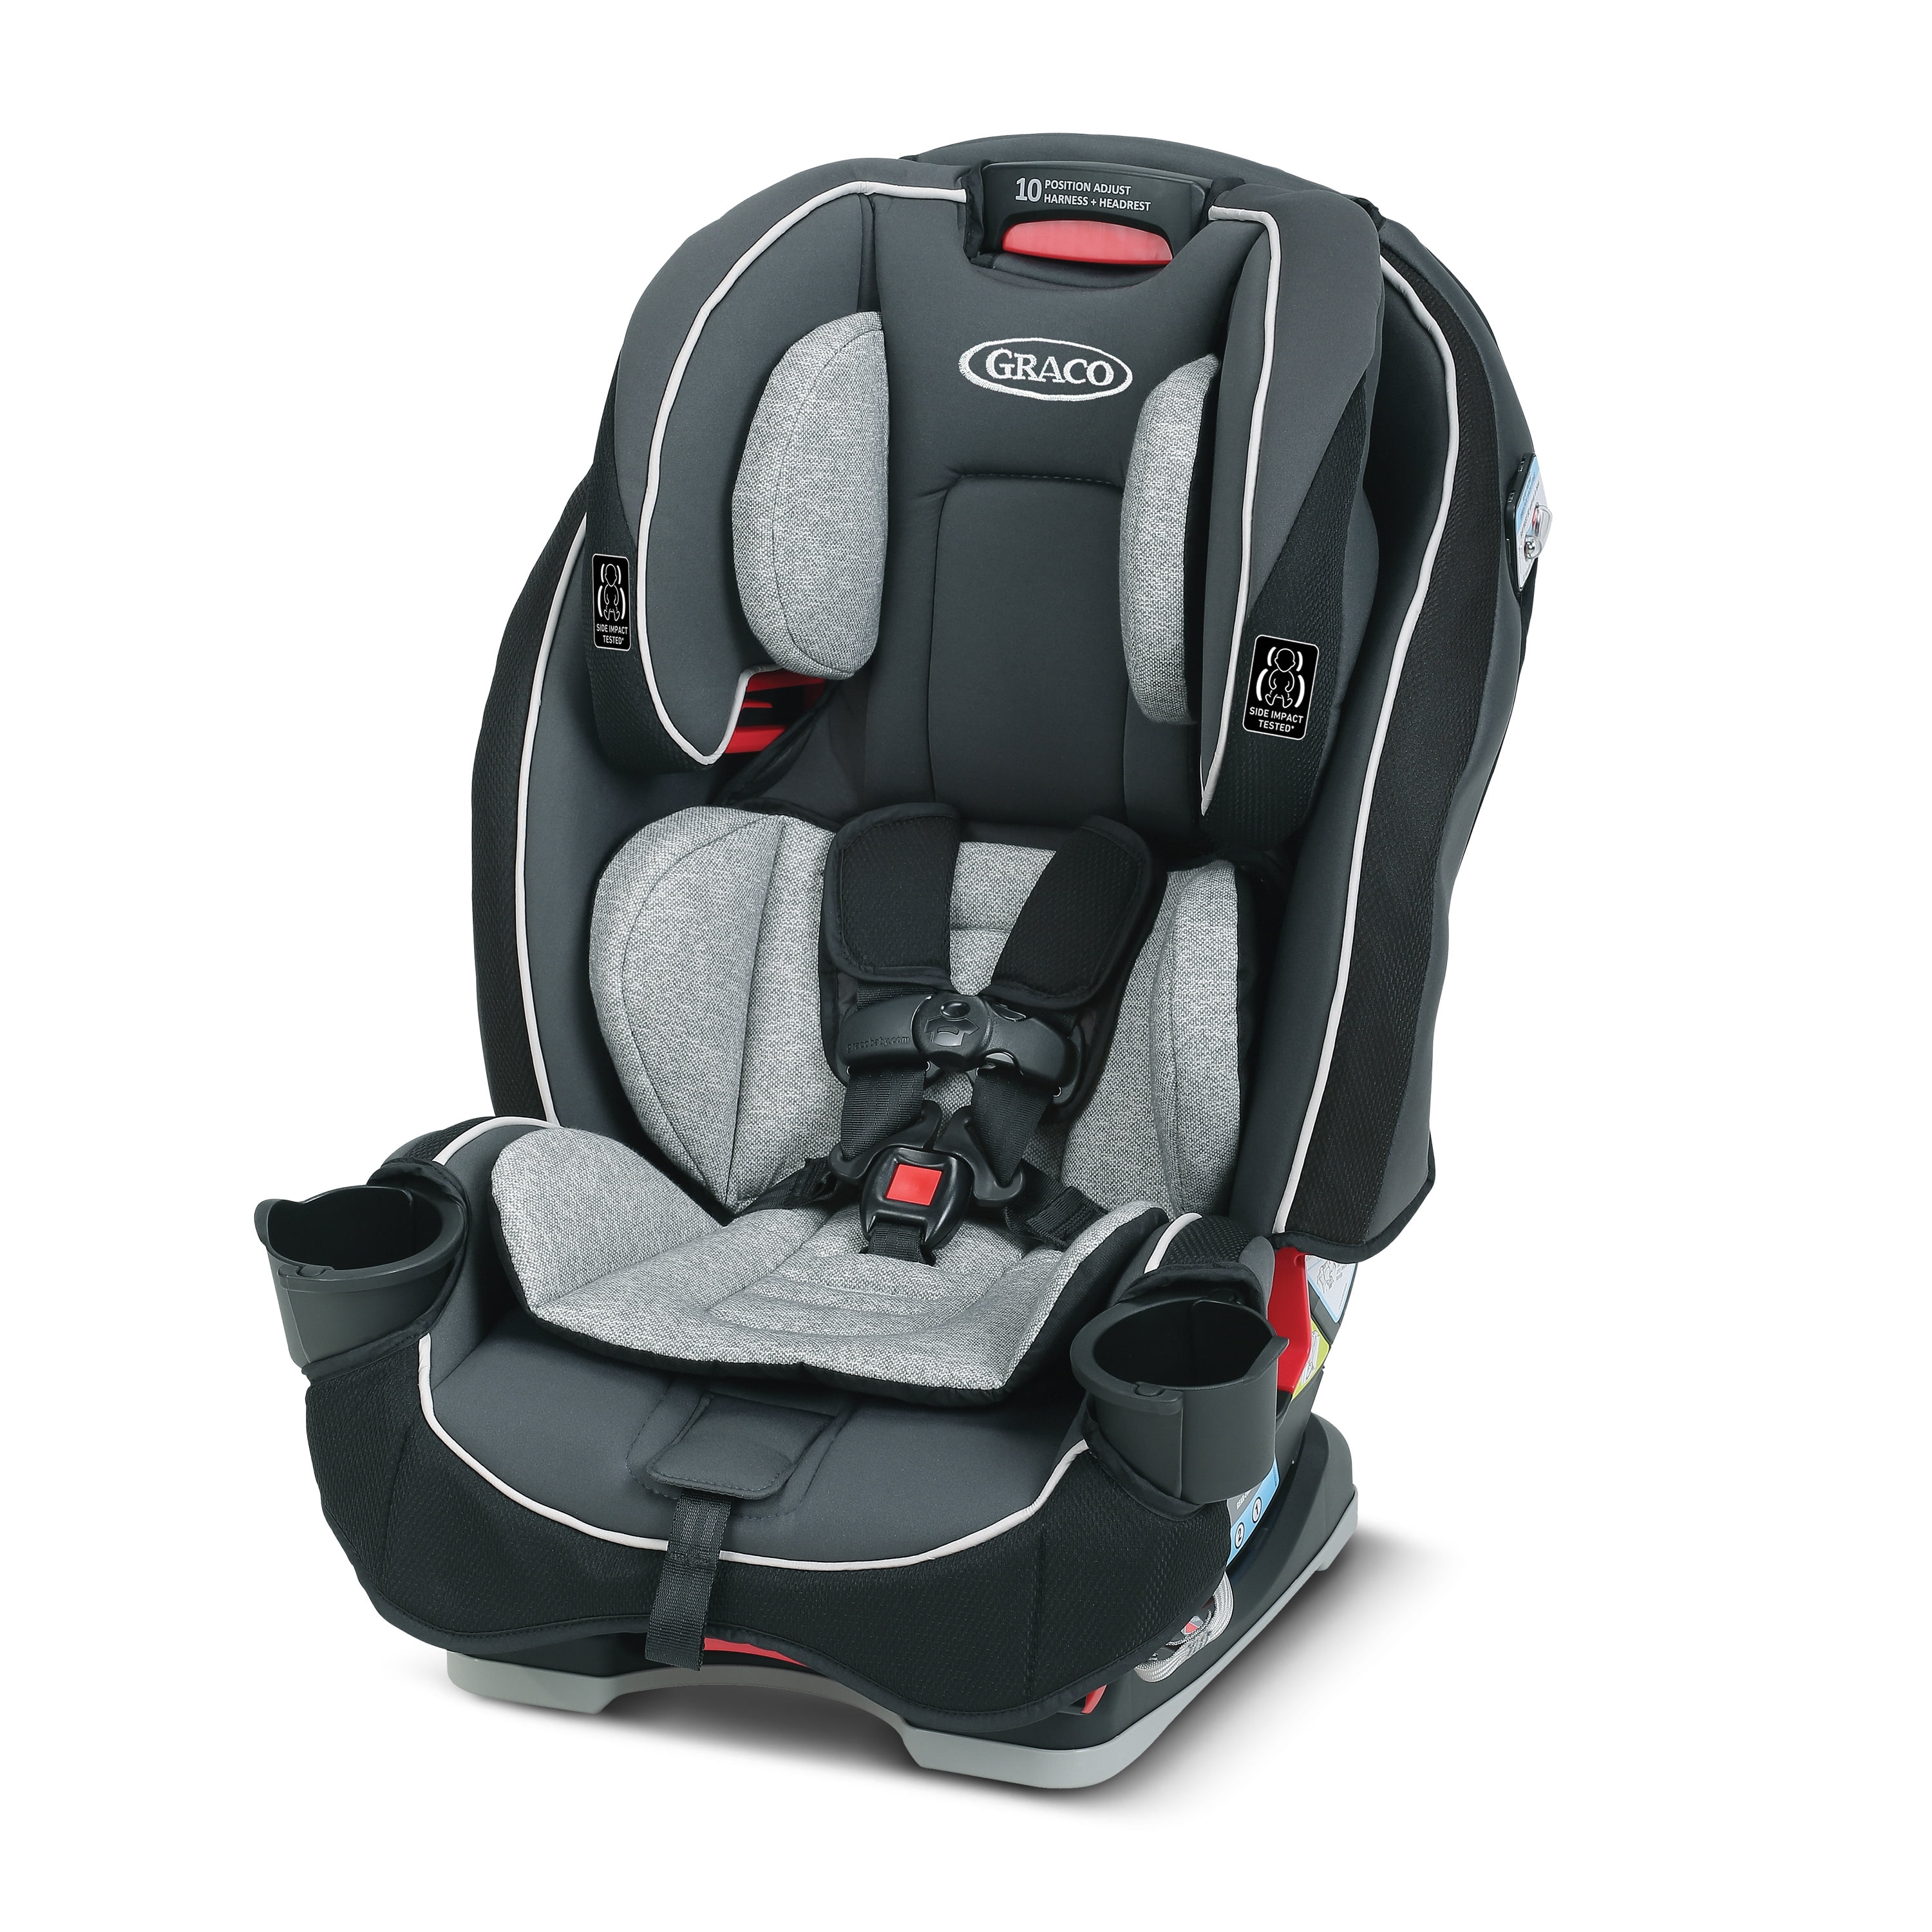 Graco SlimFit 3in1 Car Seat, Saves Space in Your Back